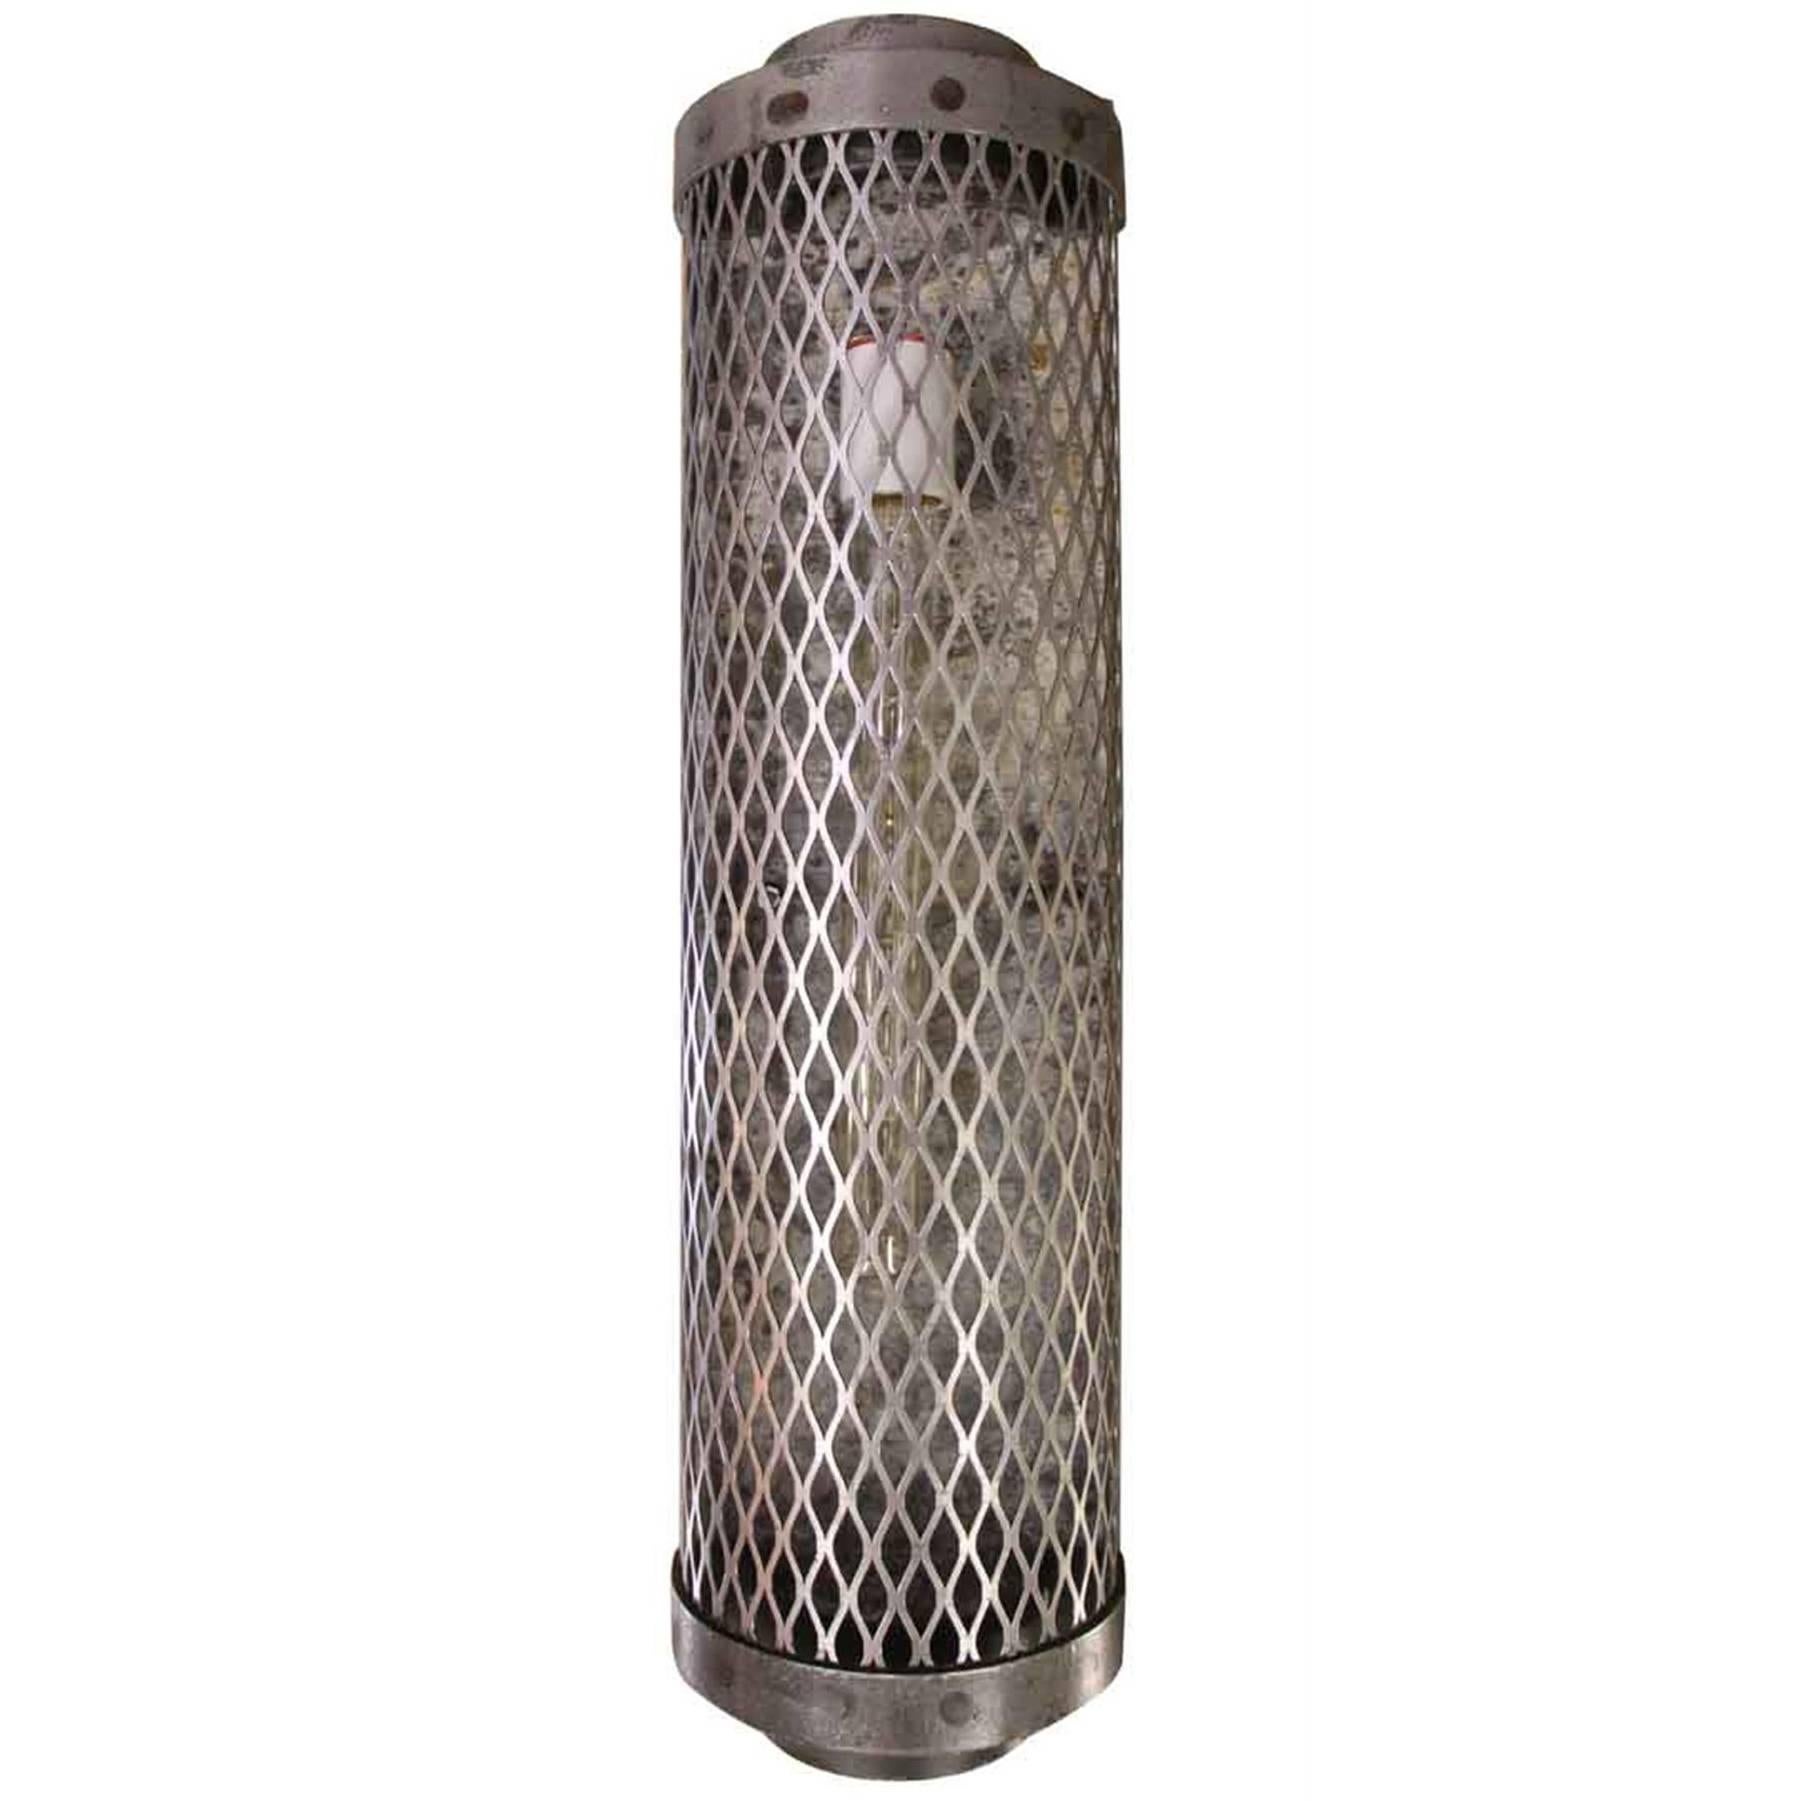 Industrial Steel Cage Sconce with an Expanded Steel Sheet Mesh Cage